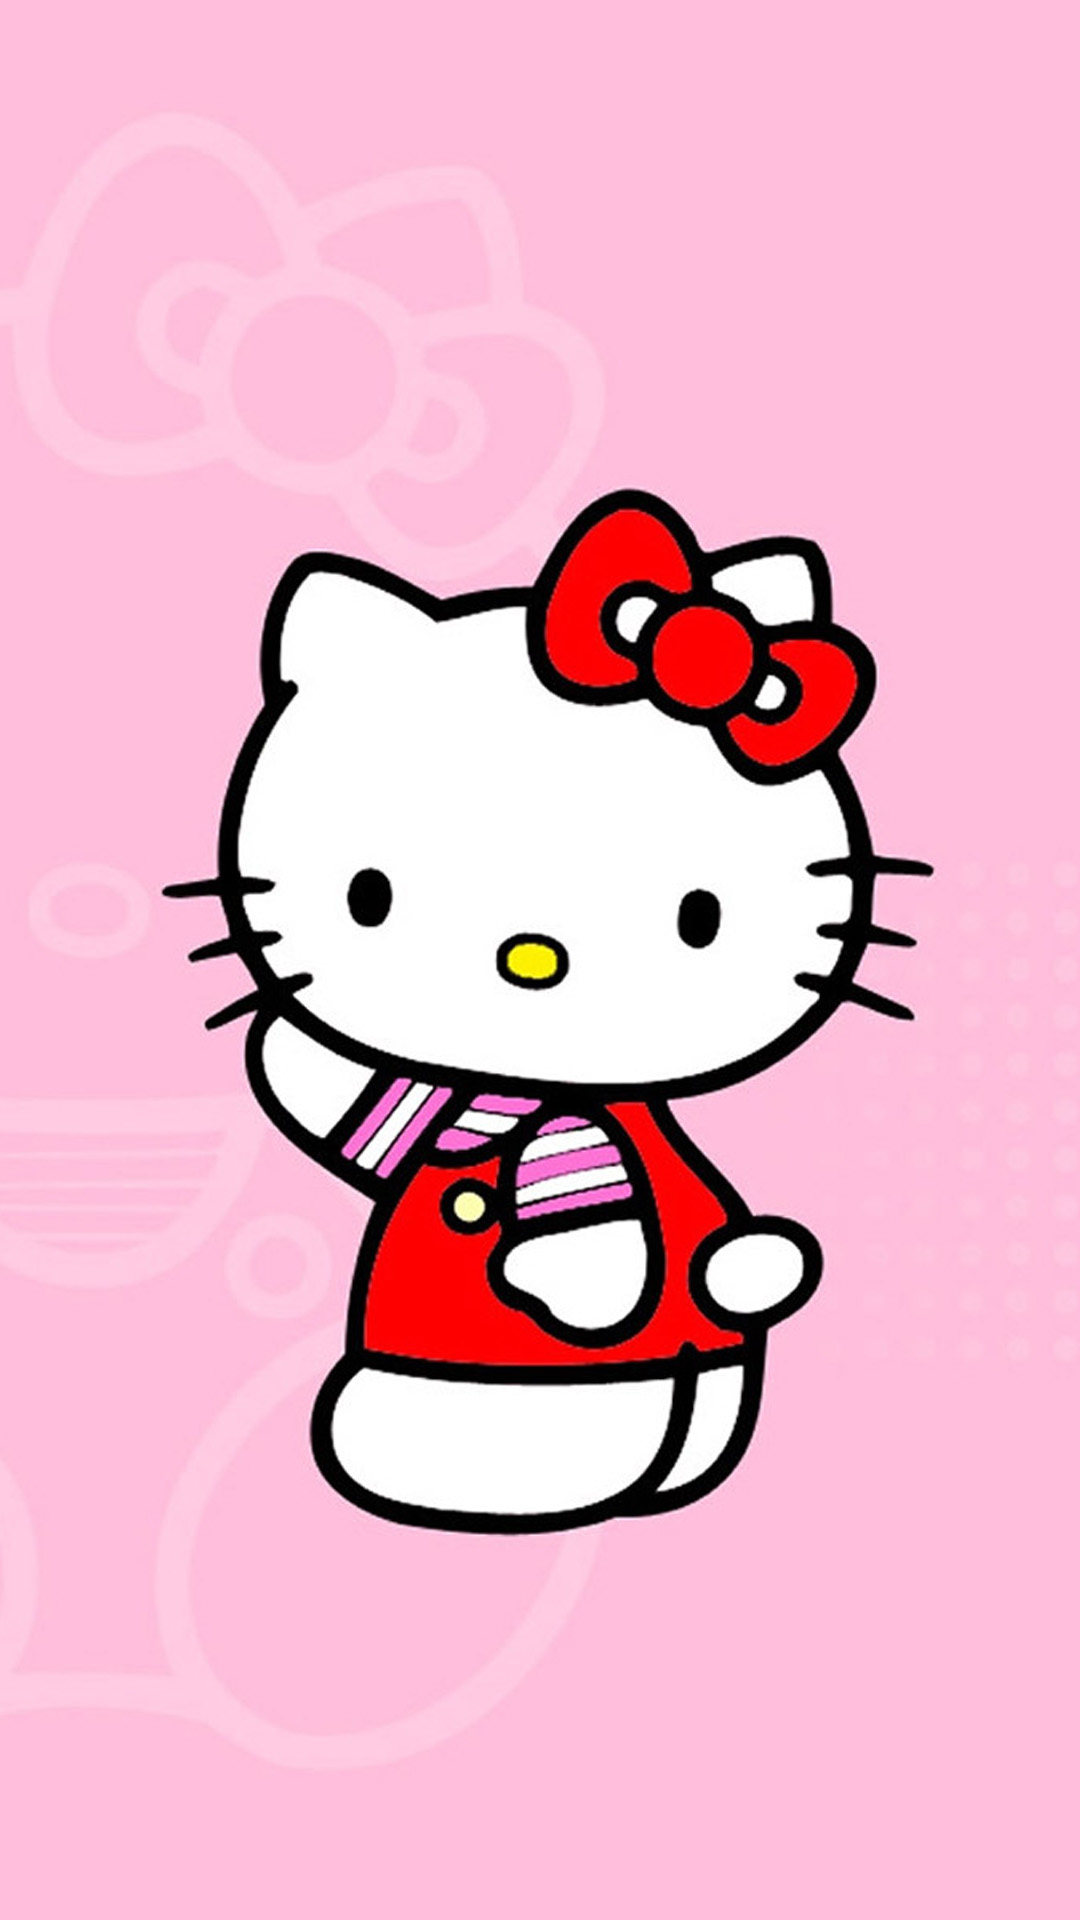 Hello Kitty Wallpapers 2015 Iphone   The Wallpaper